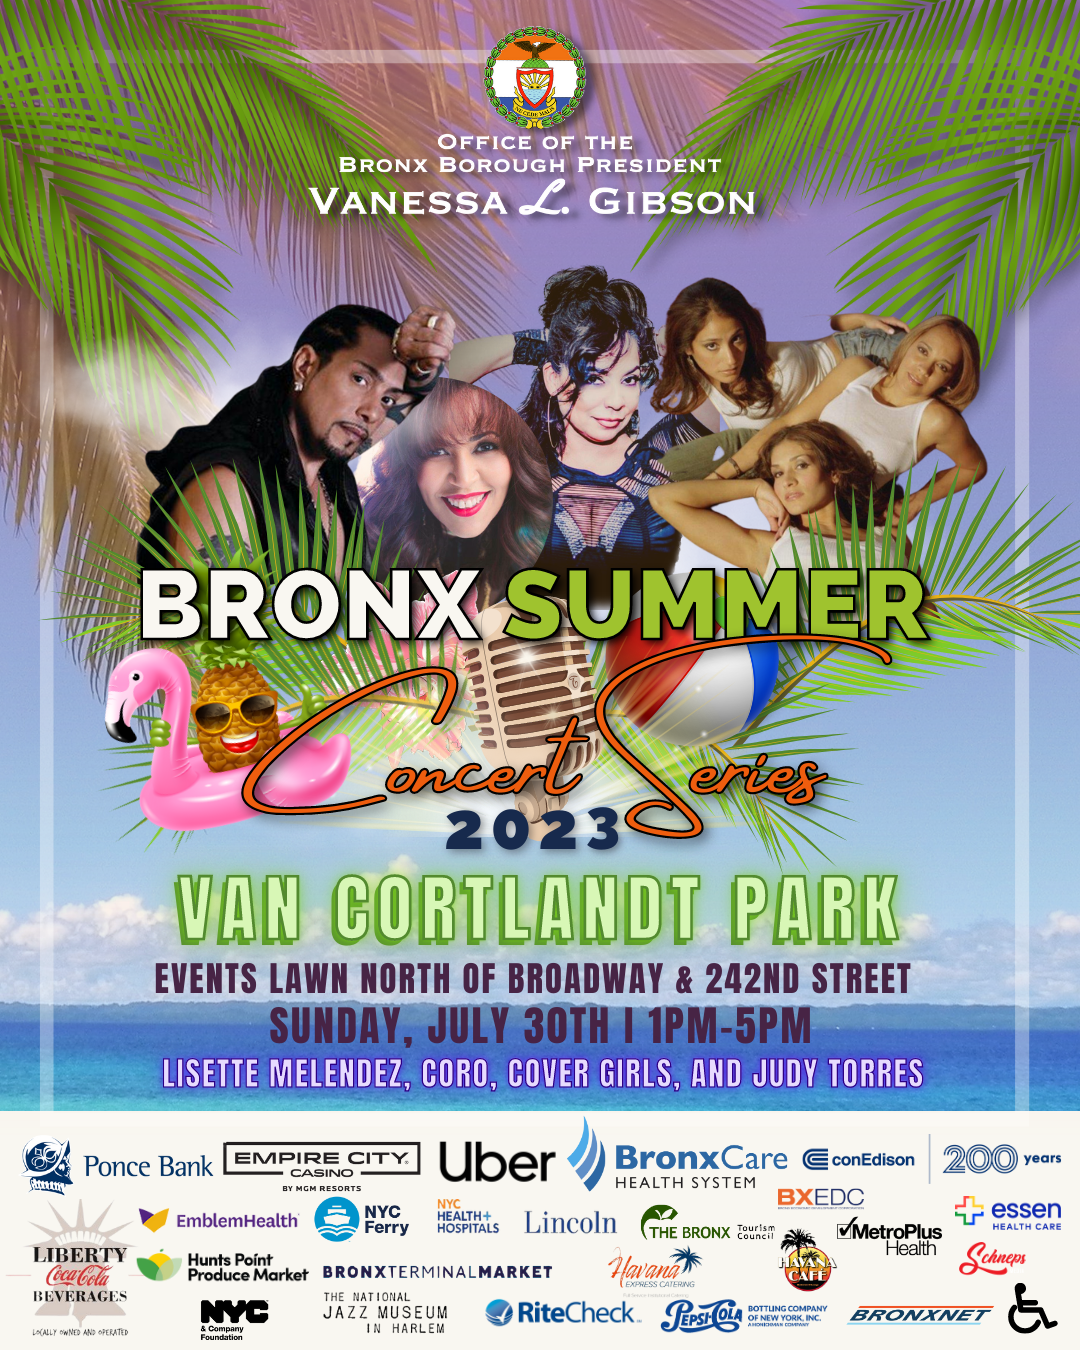 A flyer for the Bronx Summer Concert Series featuring Lisette Melendez, Coro, Cover Girls, and Judy Torres on Sunday, July 30 from 1 PM to 5 PM in Van Cortlandt Park on the lawn north of Broadway & West 242nd Street.